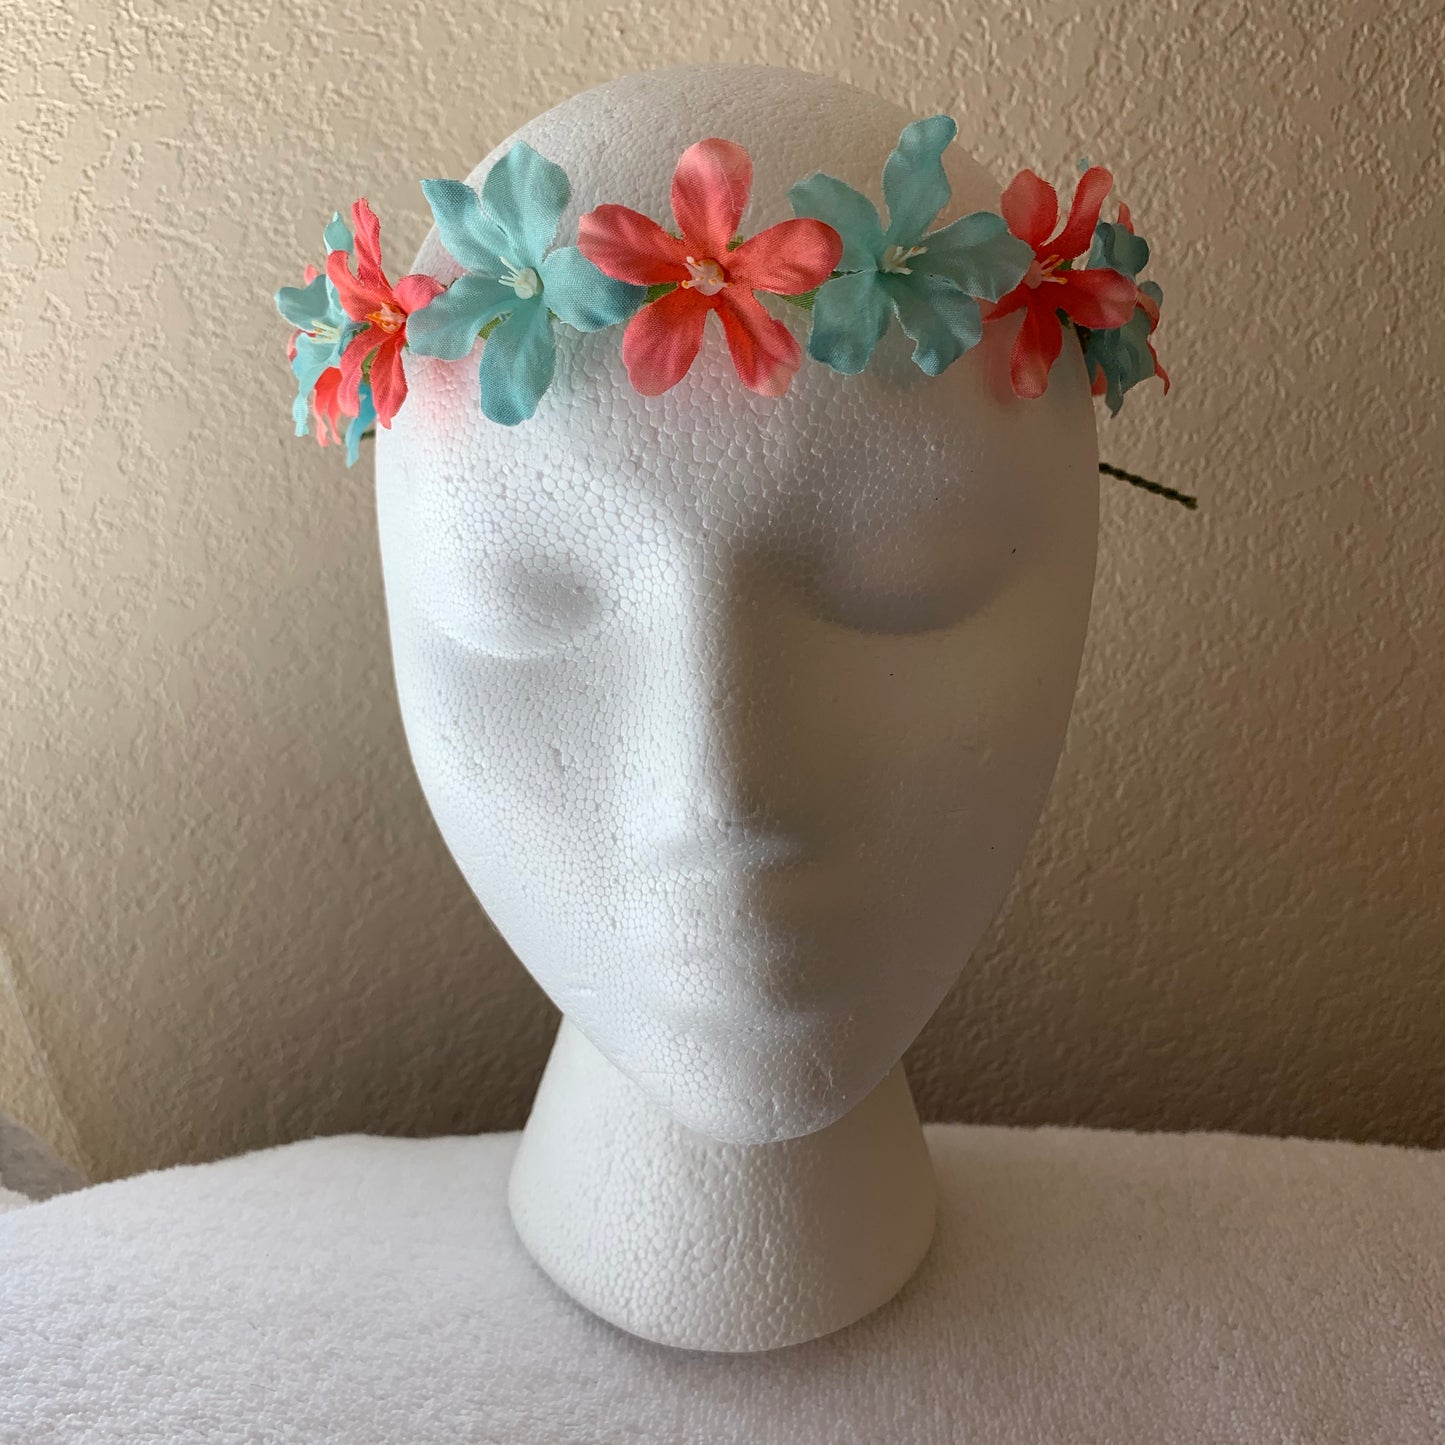 2Extra Small Wreath - Teal and Peach Flowers